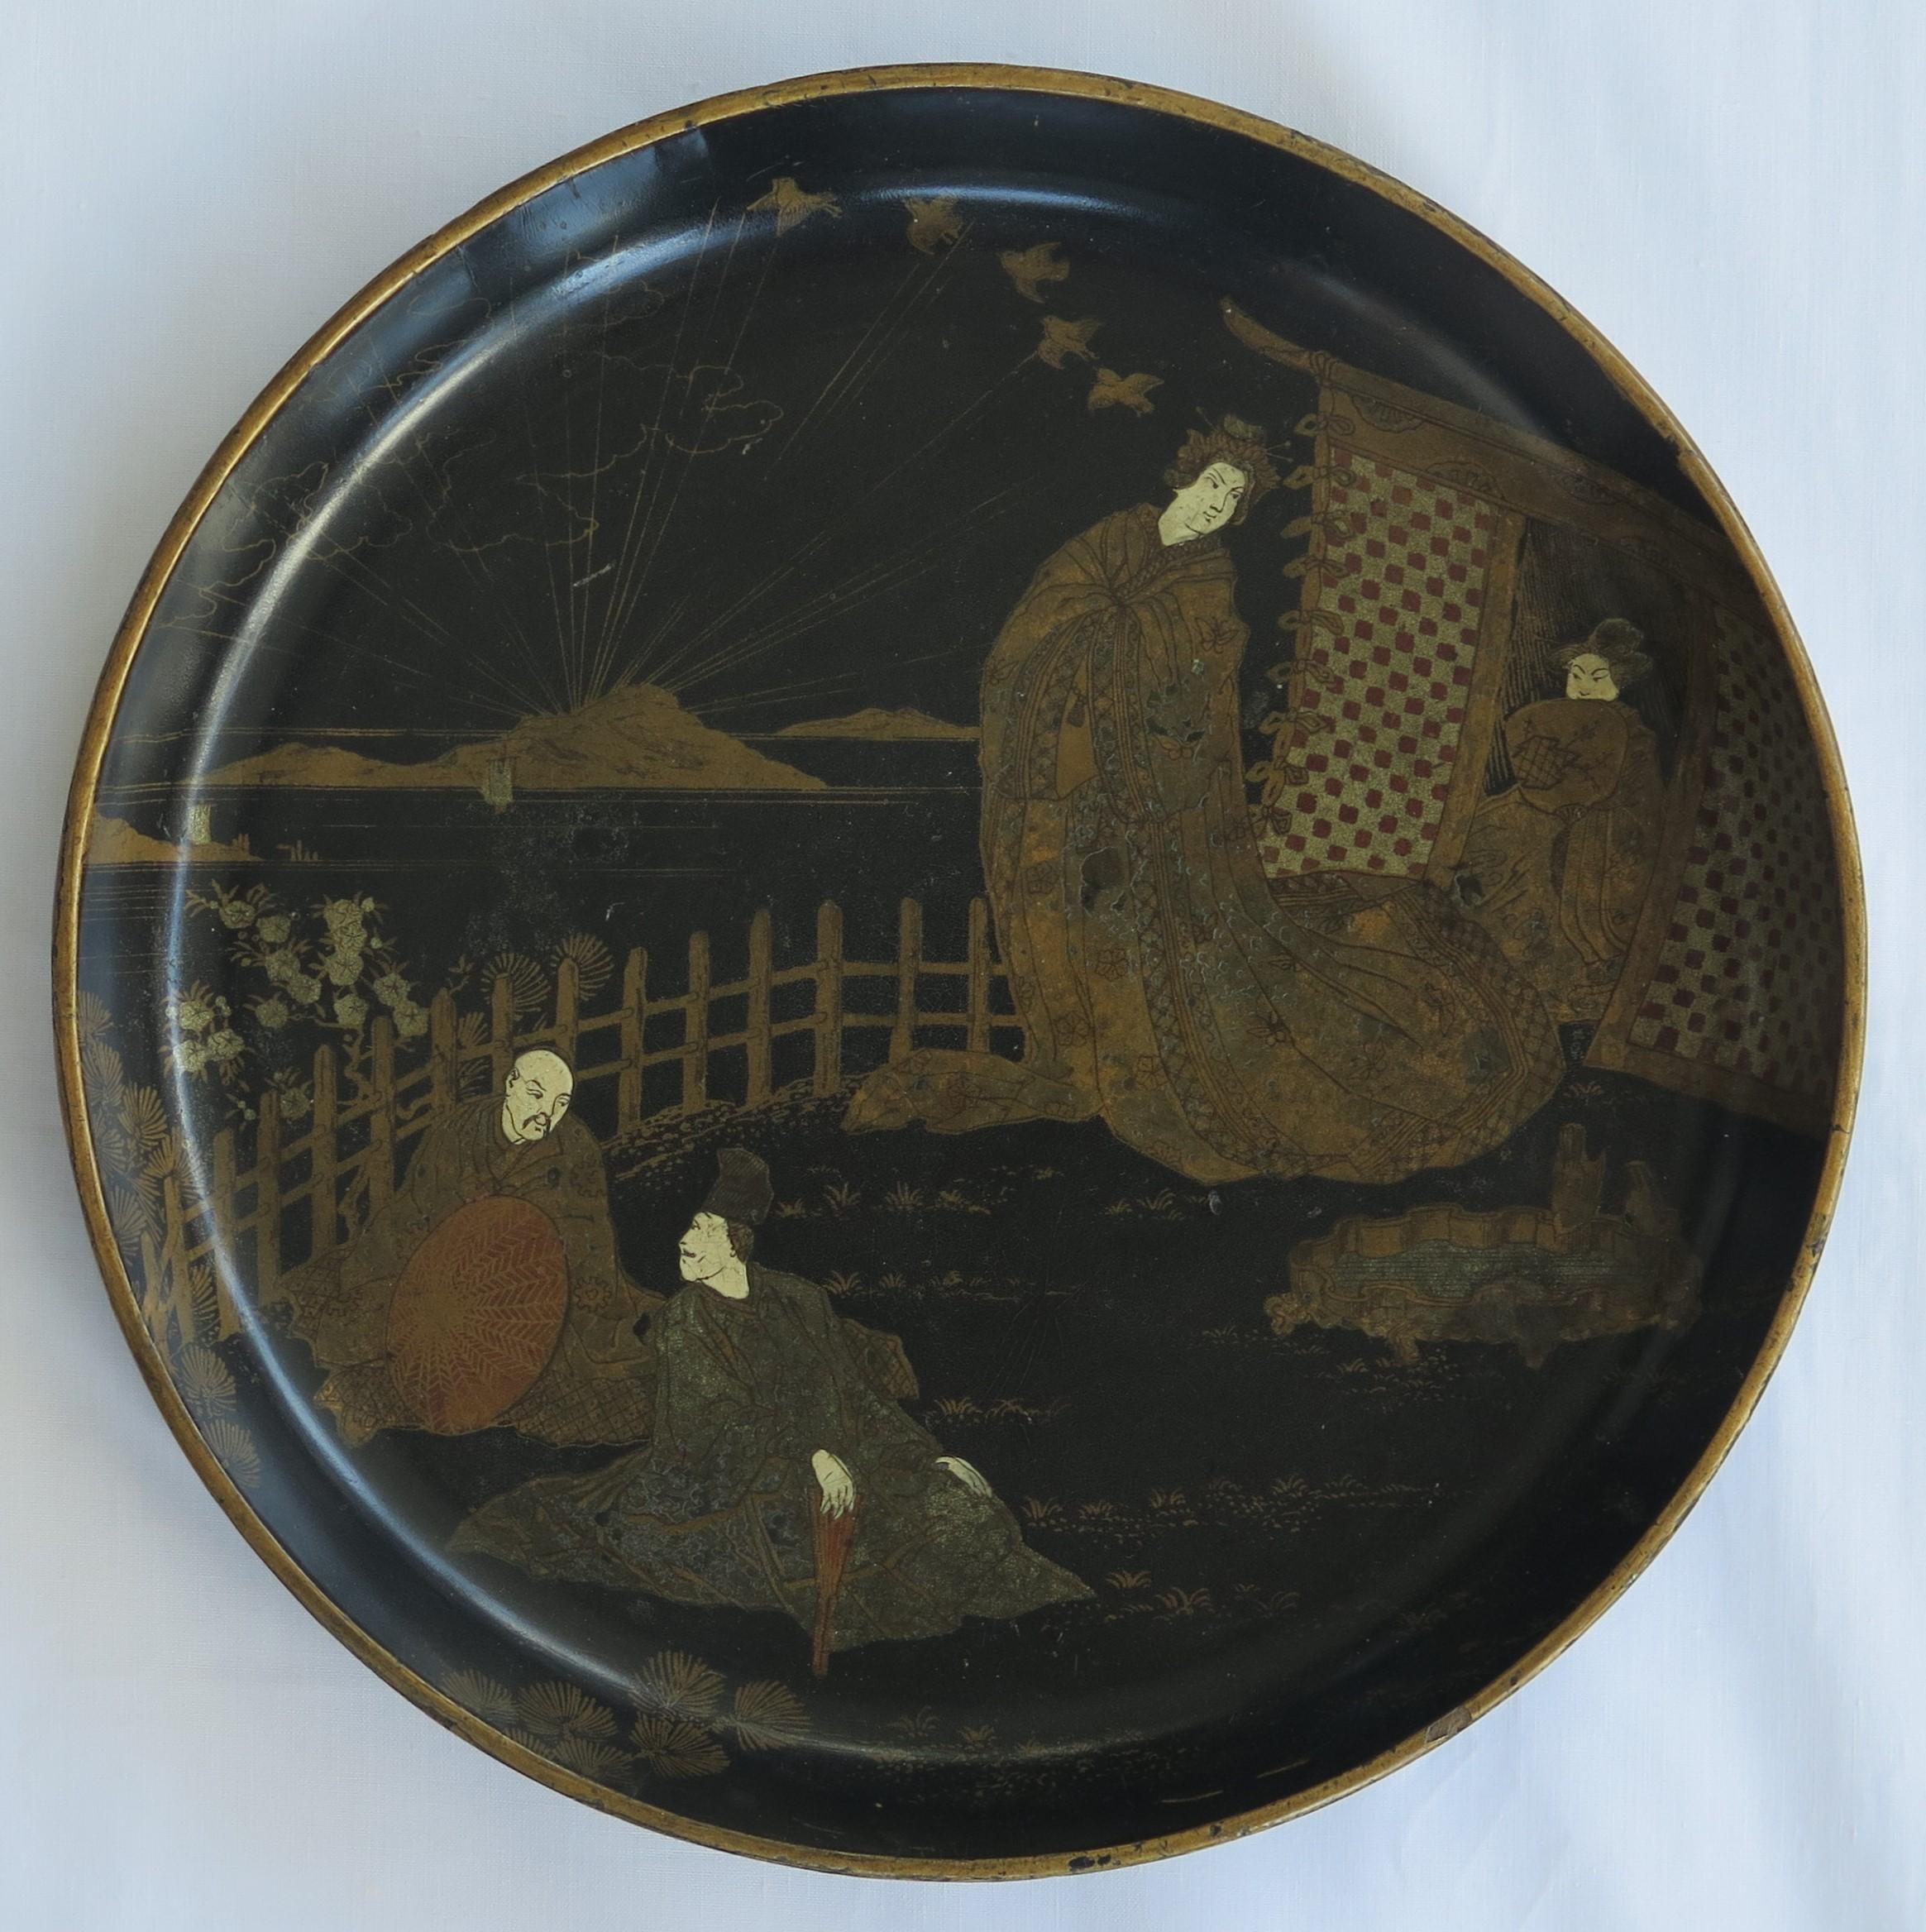 This is a good papier mâché, circular, black lacquered tray, hand enameled and gilded, made in Japan during the 19th century, Meiji period.

This circular tray is very decorative, with a finely hand painted scenes of four people in an outdoor